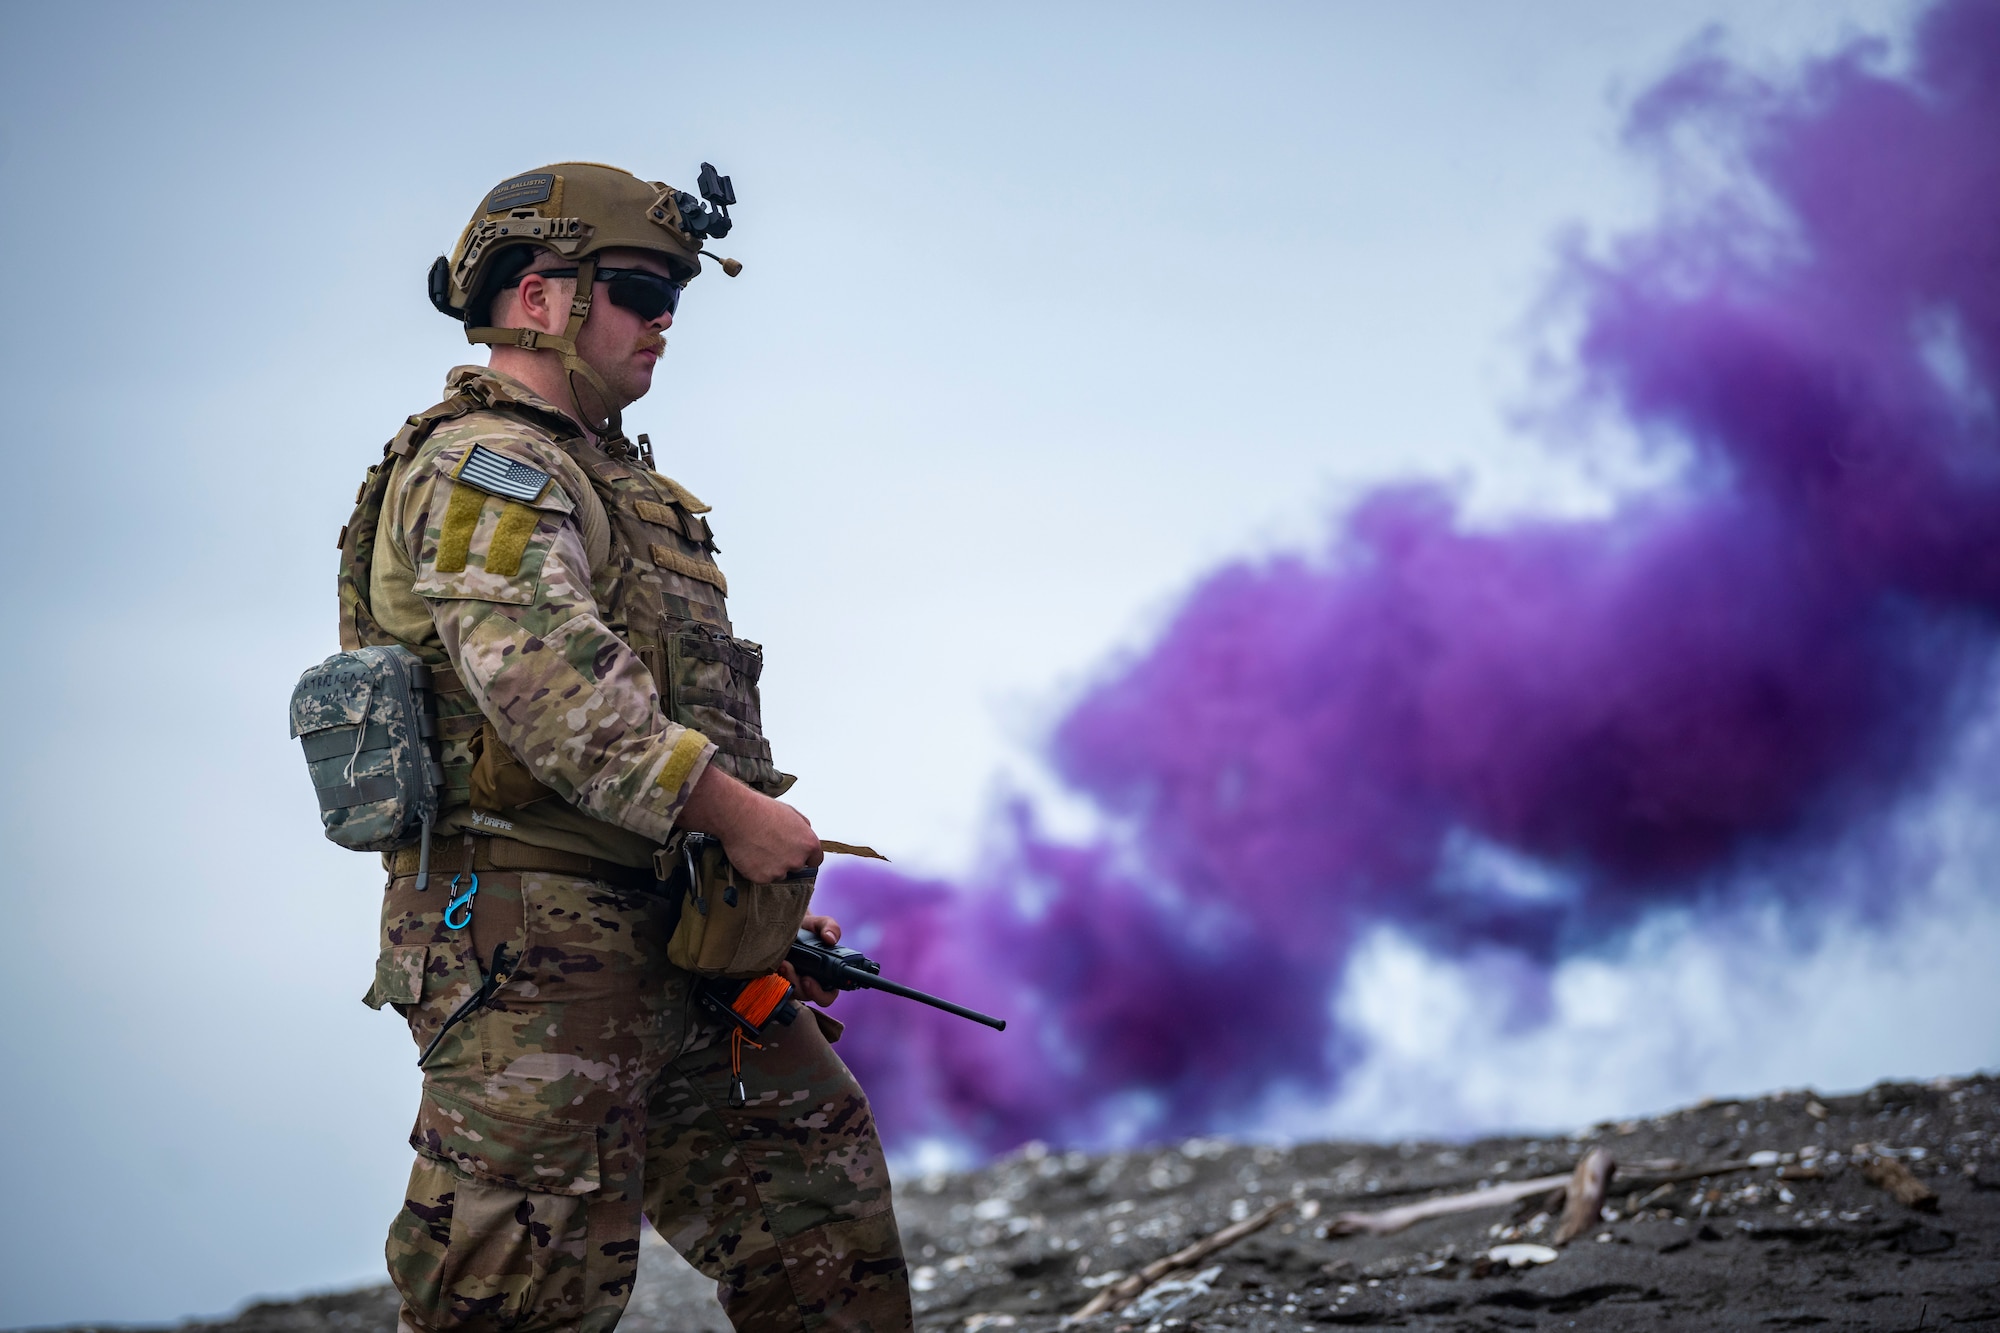 U.S. military member in tactical gear calls in a medical evacuation on the radio as purple smoke spreads in the sky.